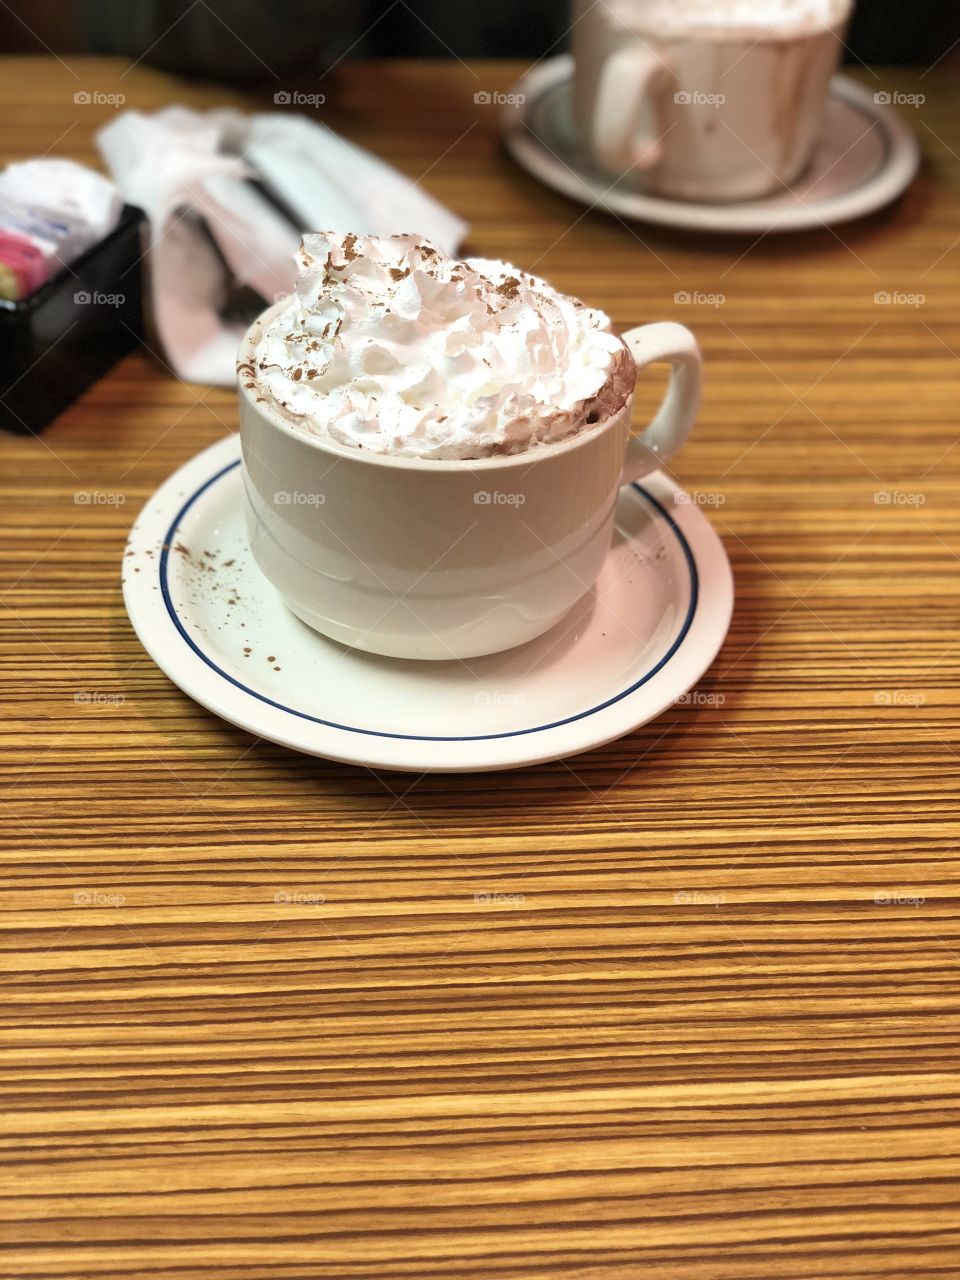 One of my favorite drinks from IHOP. It’s a must that I get this every year! Hot chocolate. 